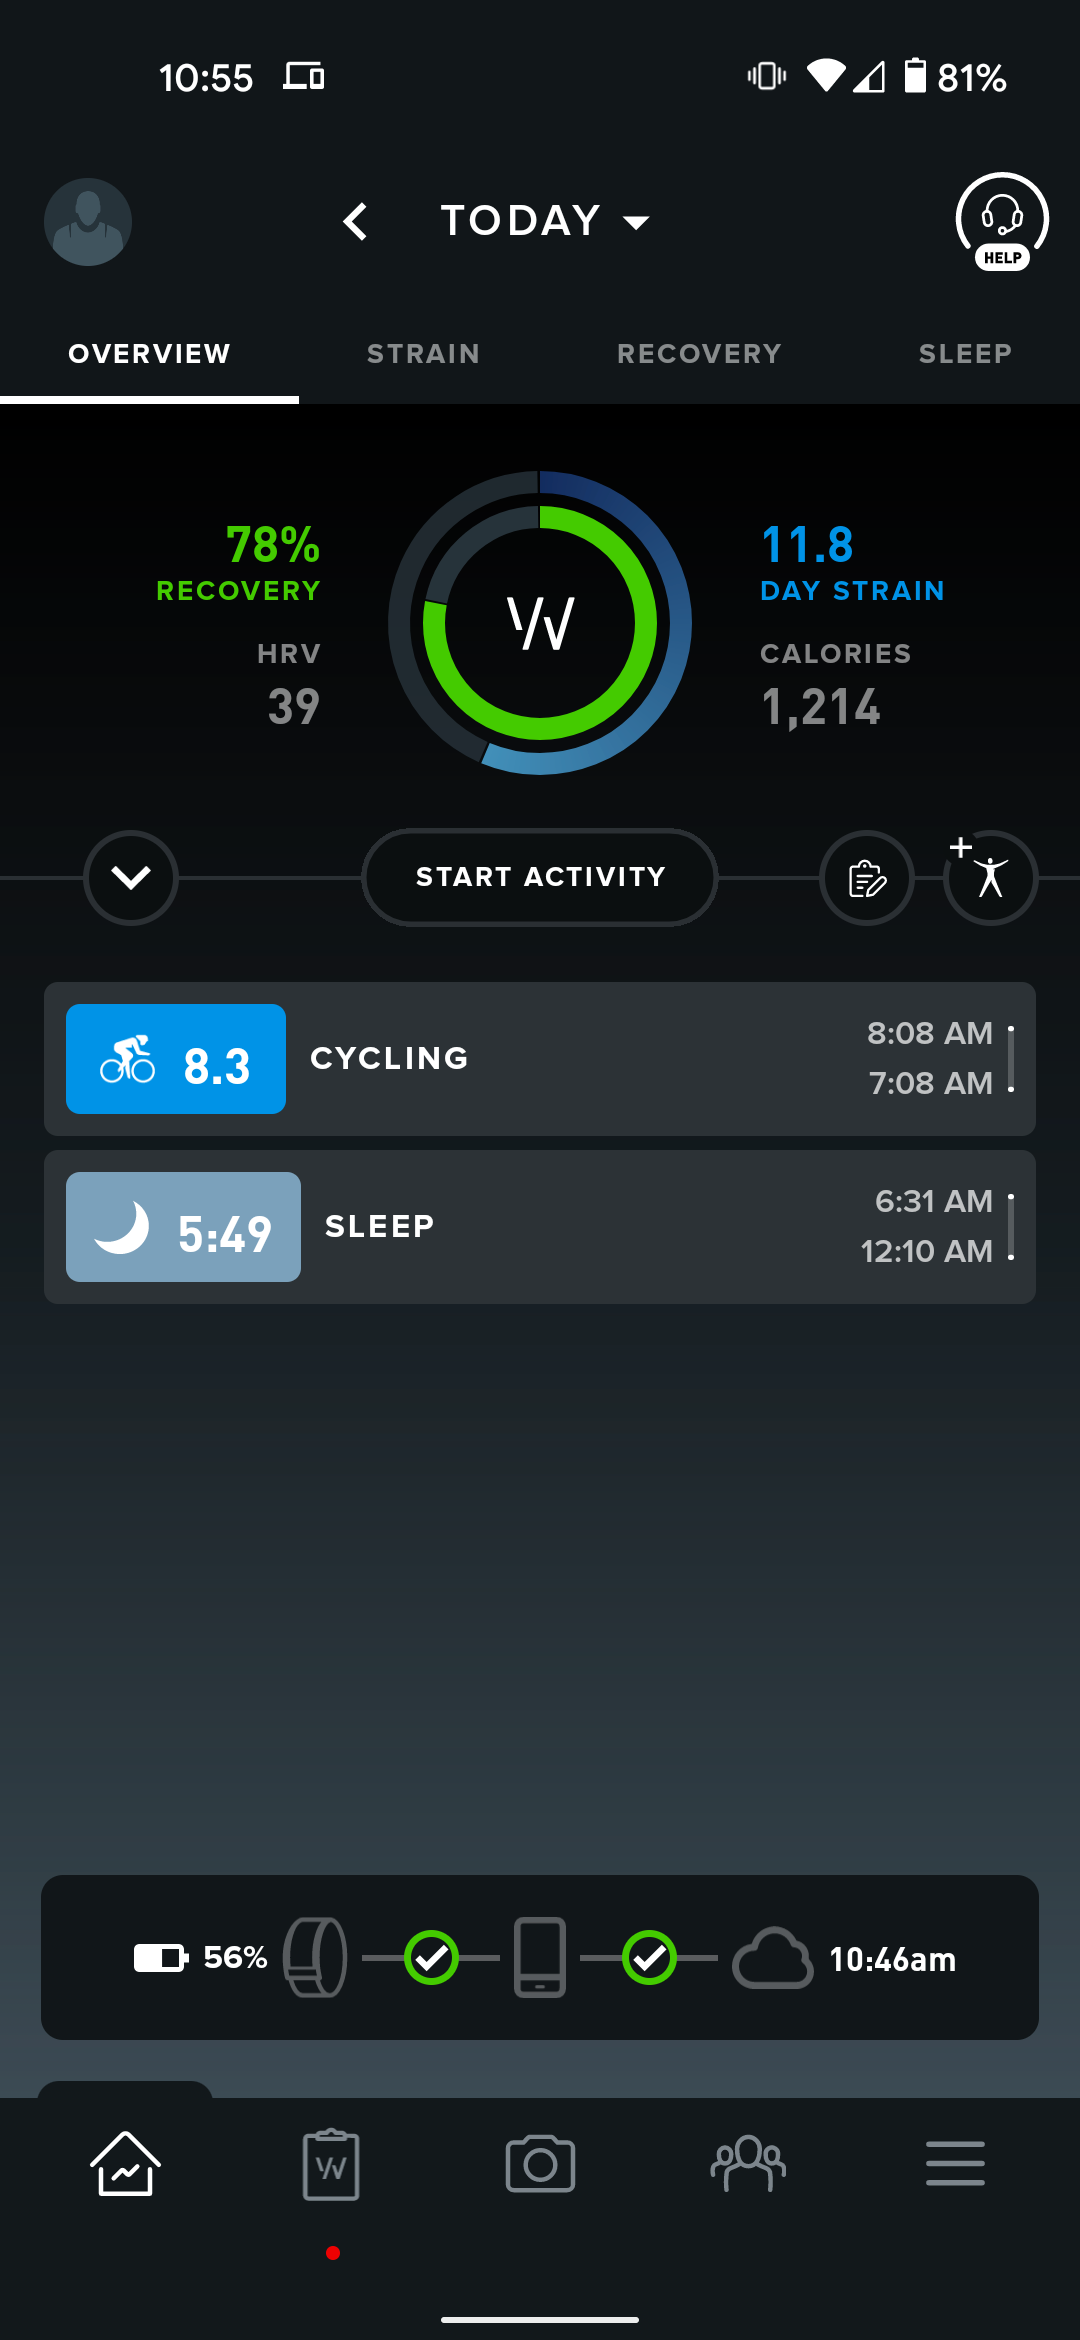 Whoop's main screen, showing a workout, day strain, and sleep